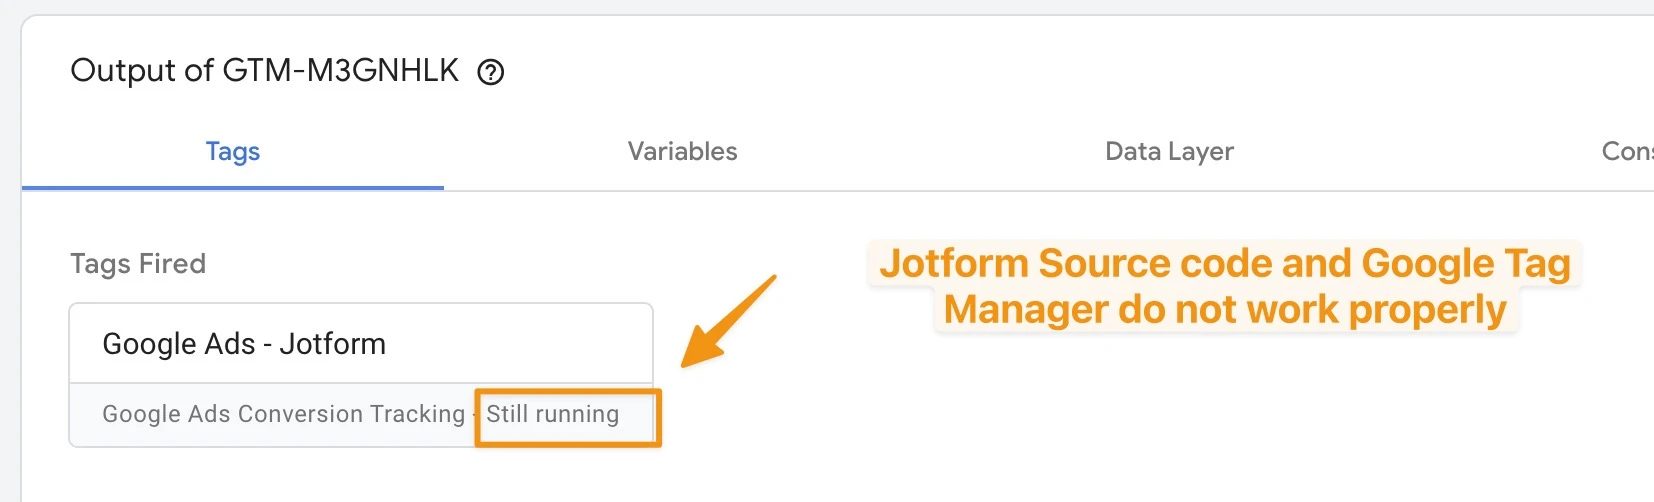 How can I use google tag manager with JotForm? Image 2 Screenshot 41